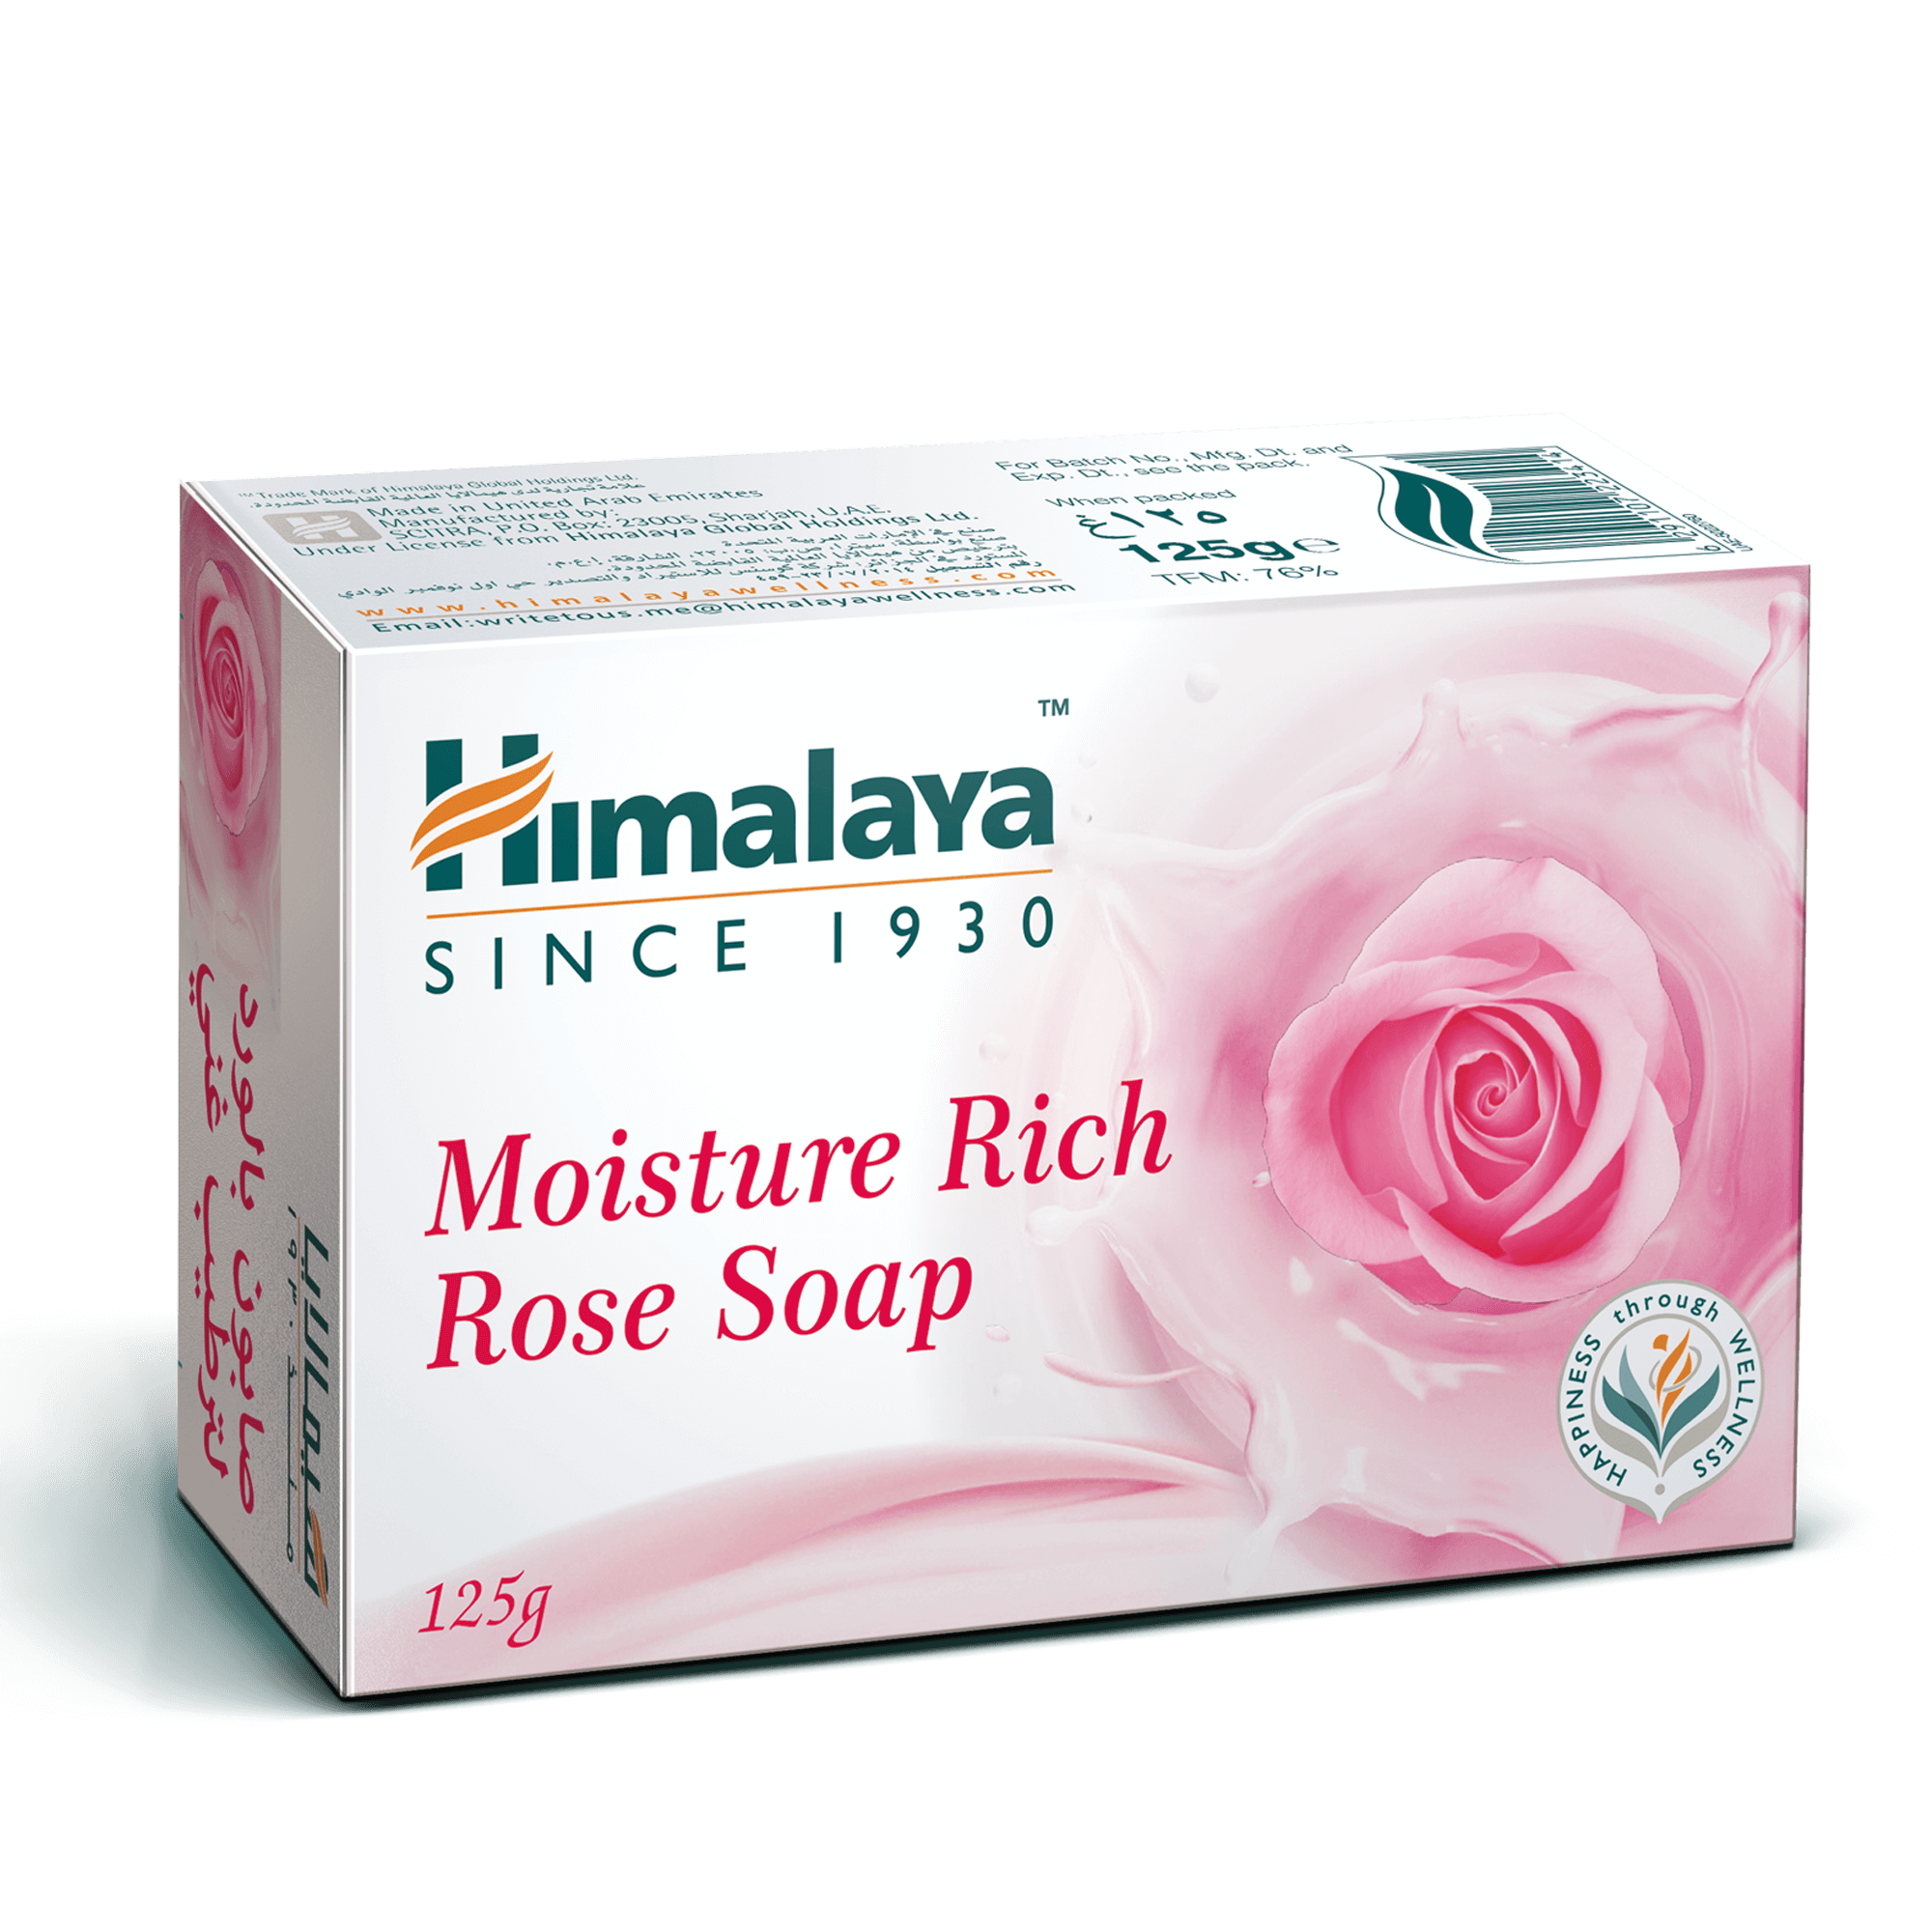 Himalaya Moisture Rich Rose Soap 125g - Hydrates & Soothes the Skin